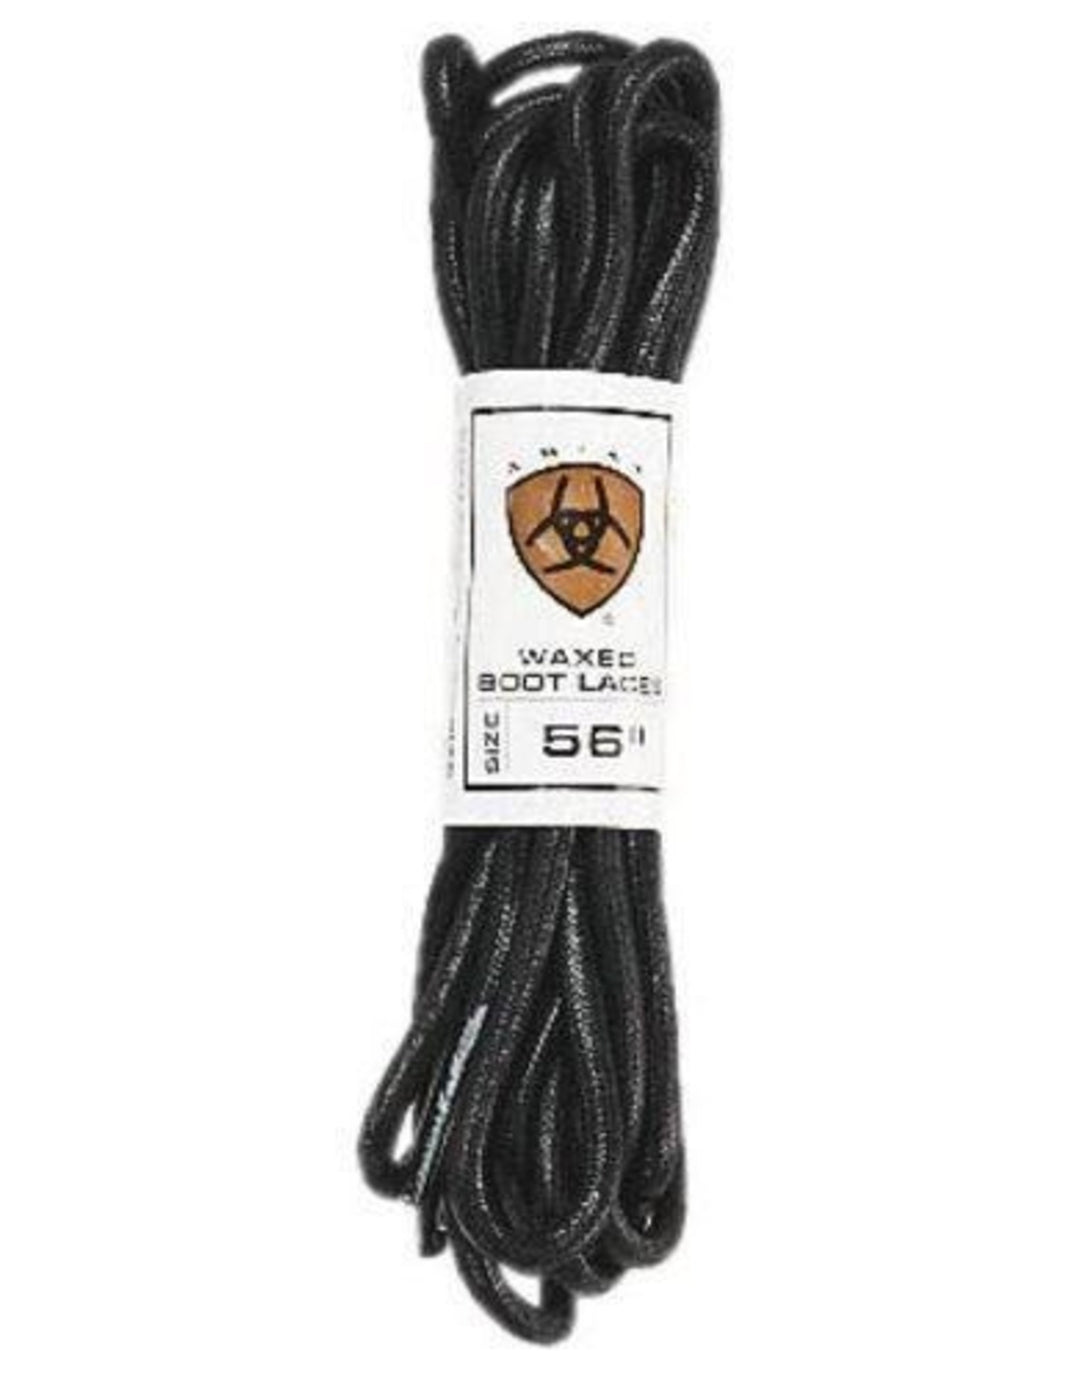 PADDOCK BOOT LACES